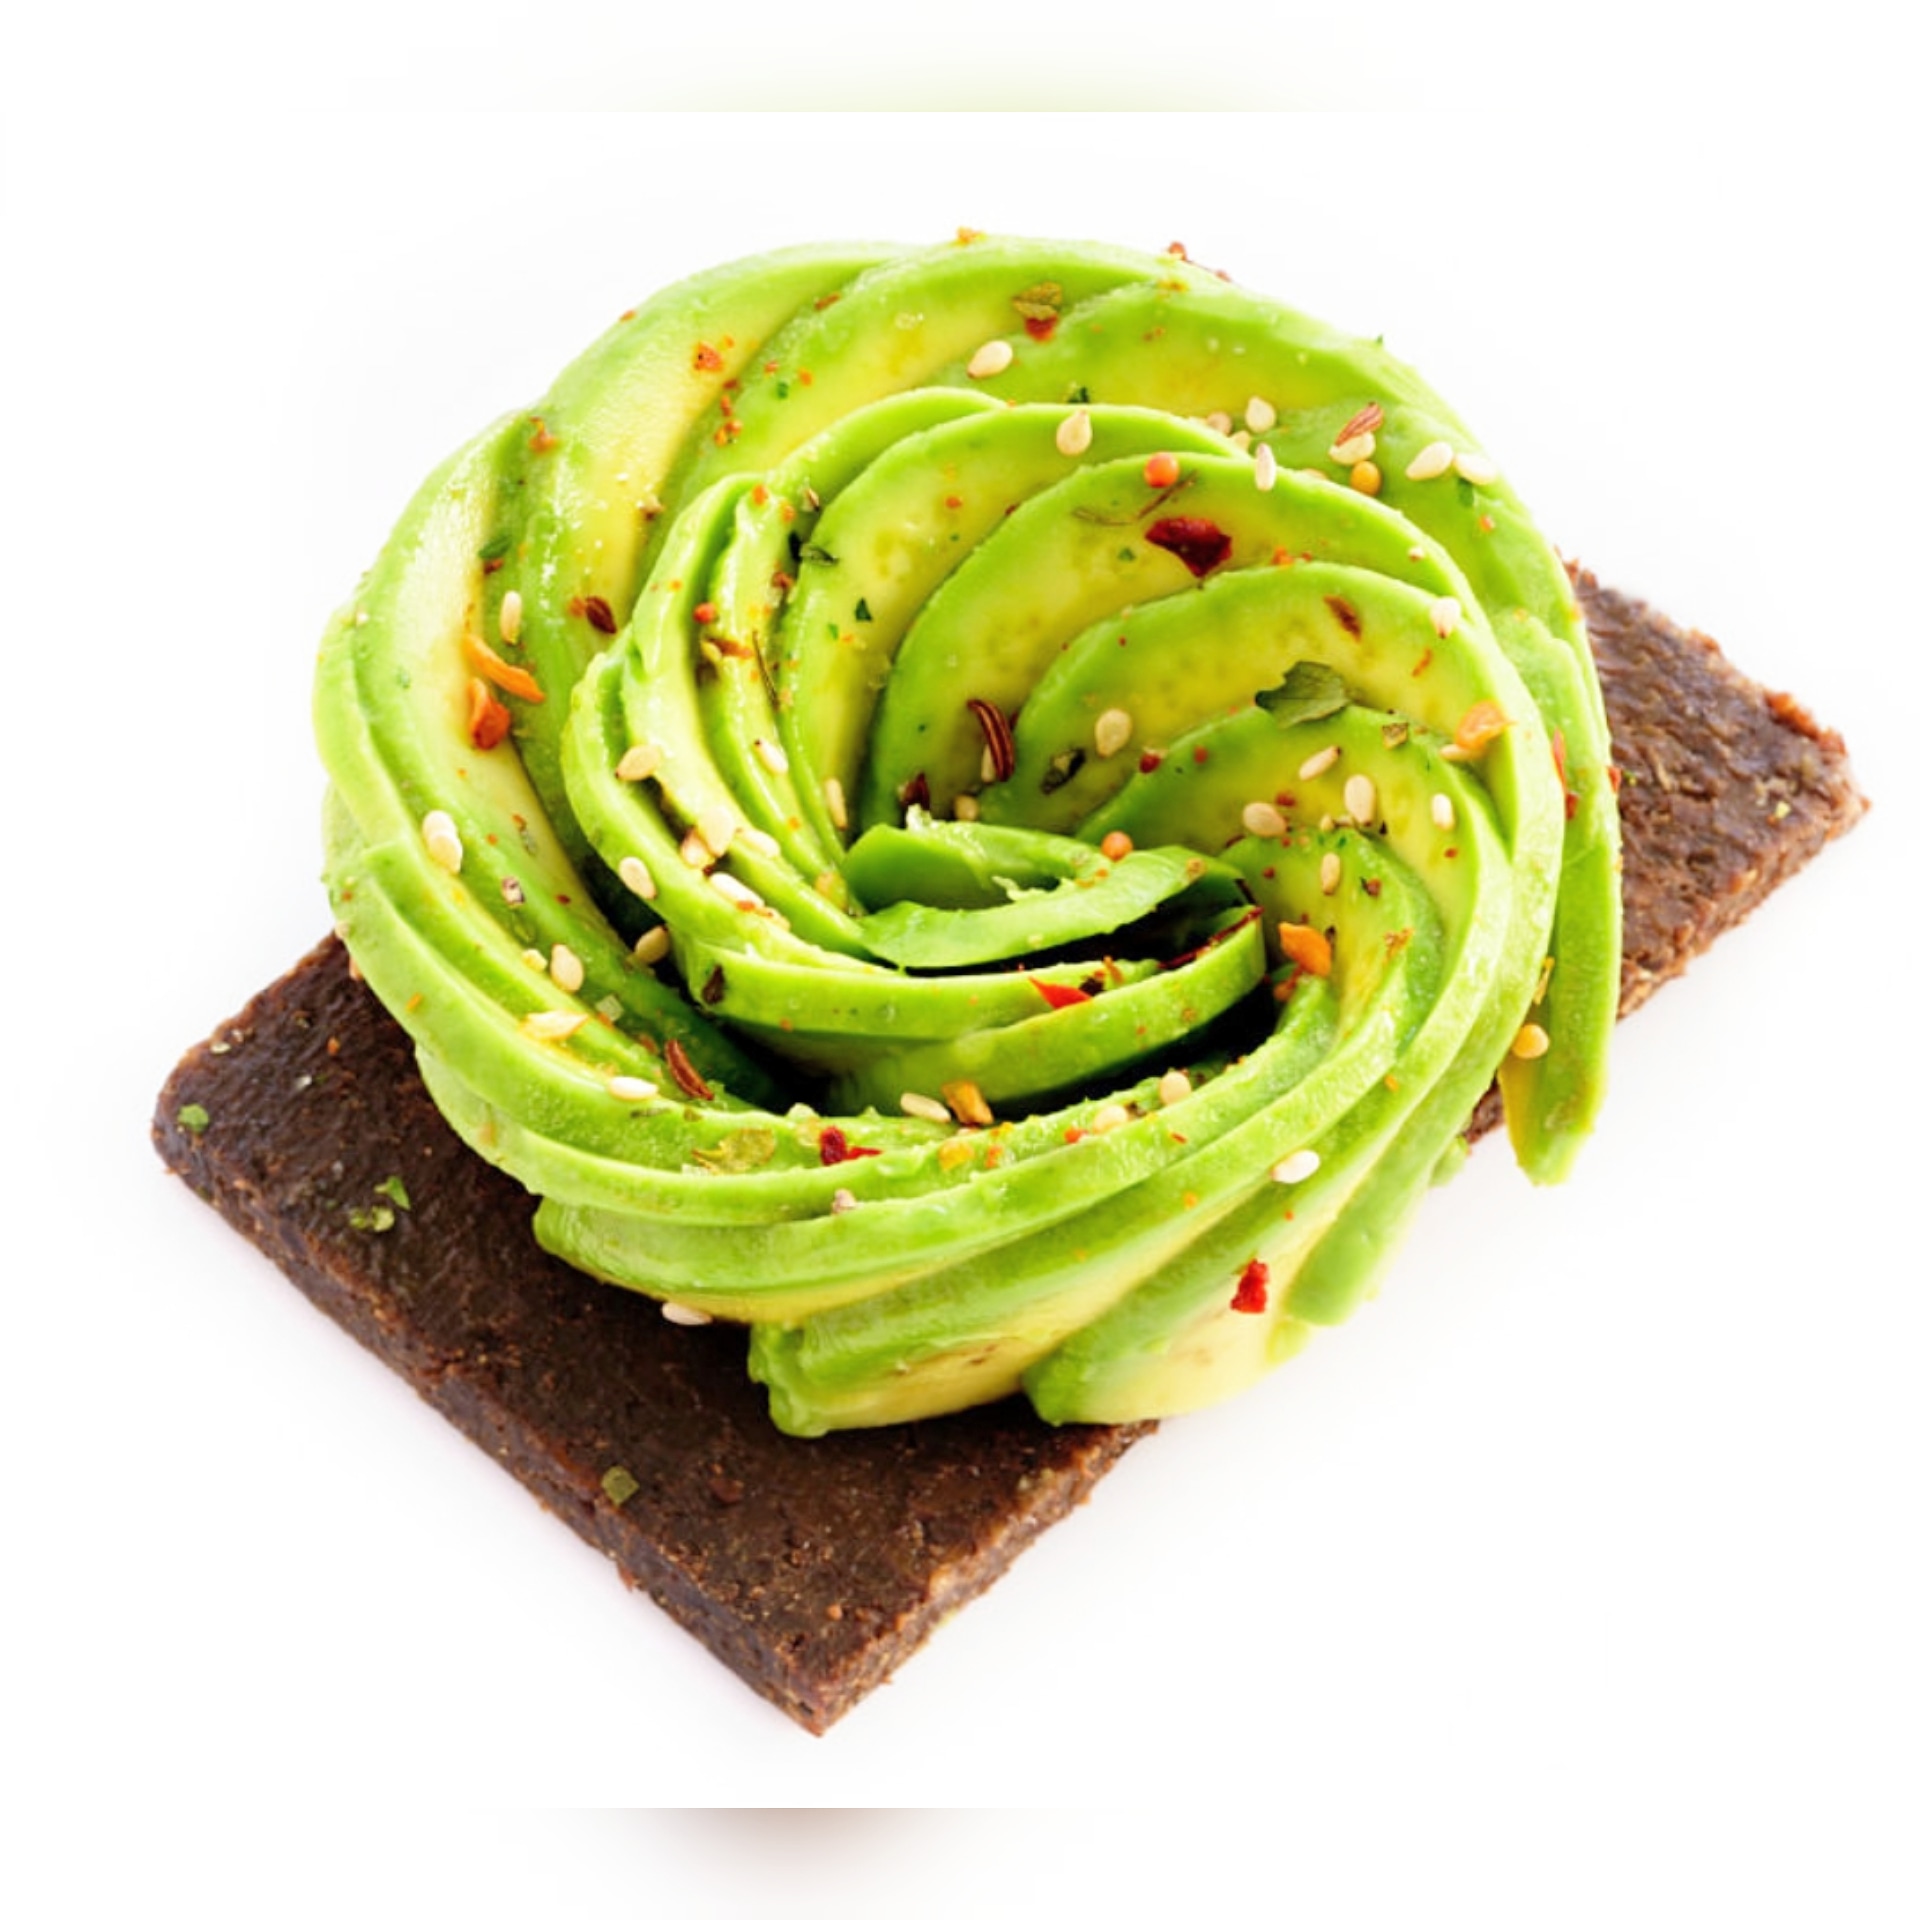 Avocado Rose: how to do it - The Spice Chica™